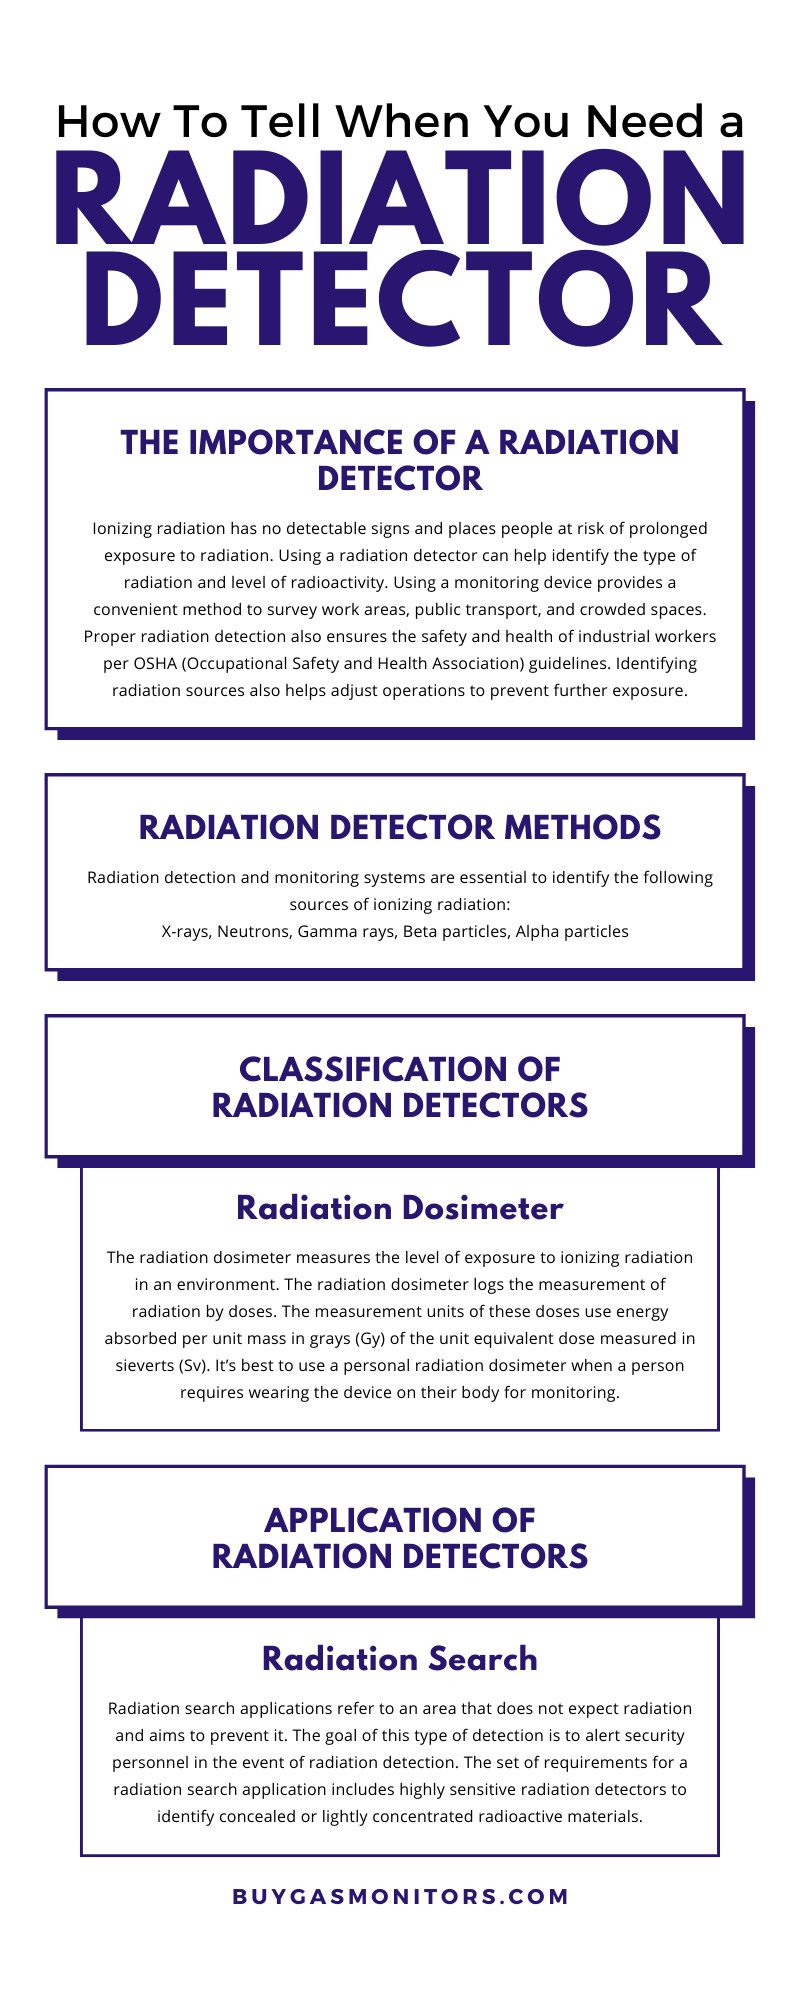 How To Tell When You Need a Radiation Detector